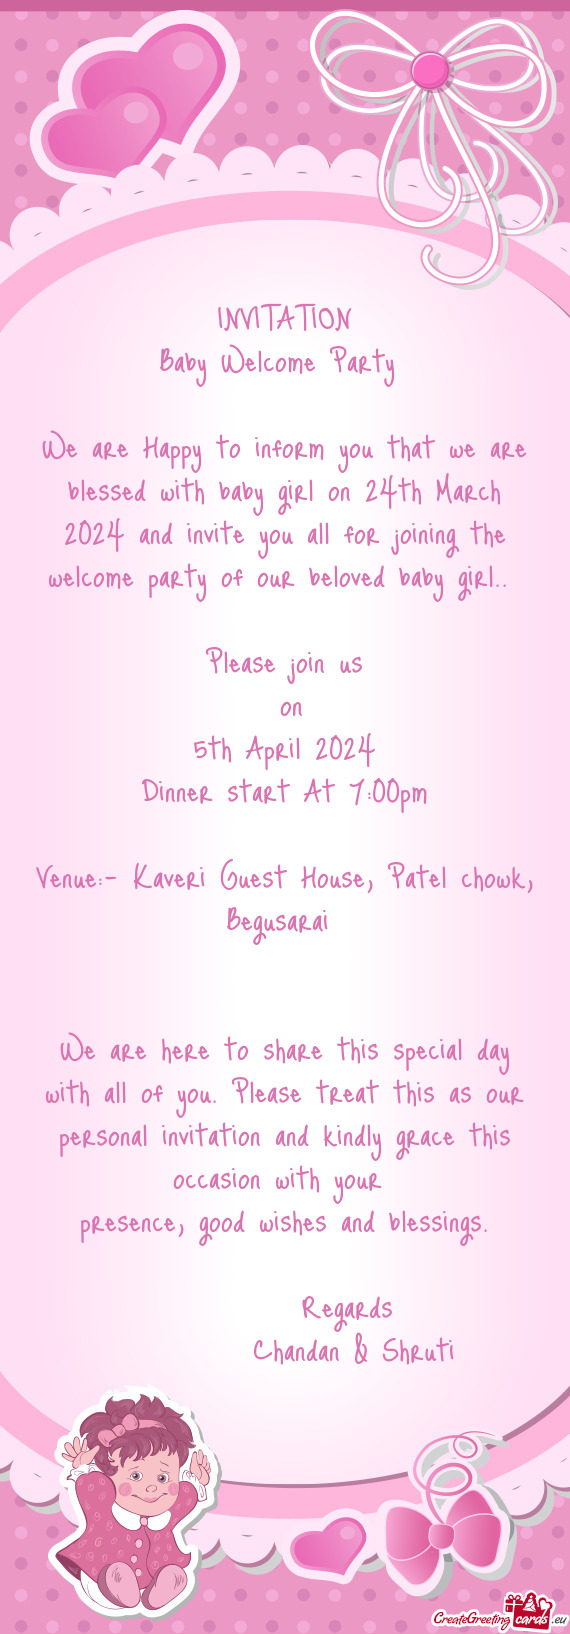 We are Happy to inform you that we are blessed with baby girl on 24th March 2024 and invite you all